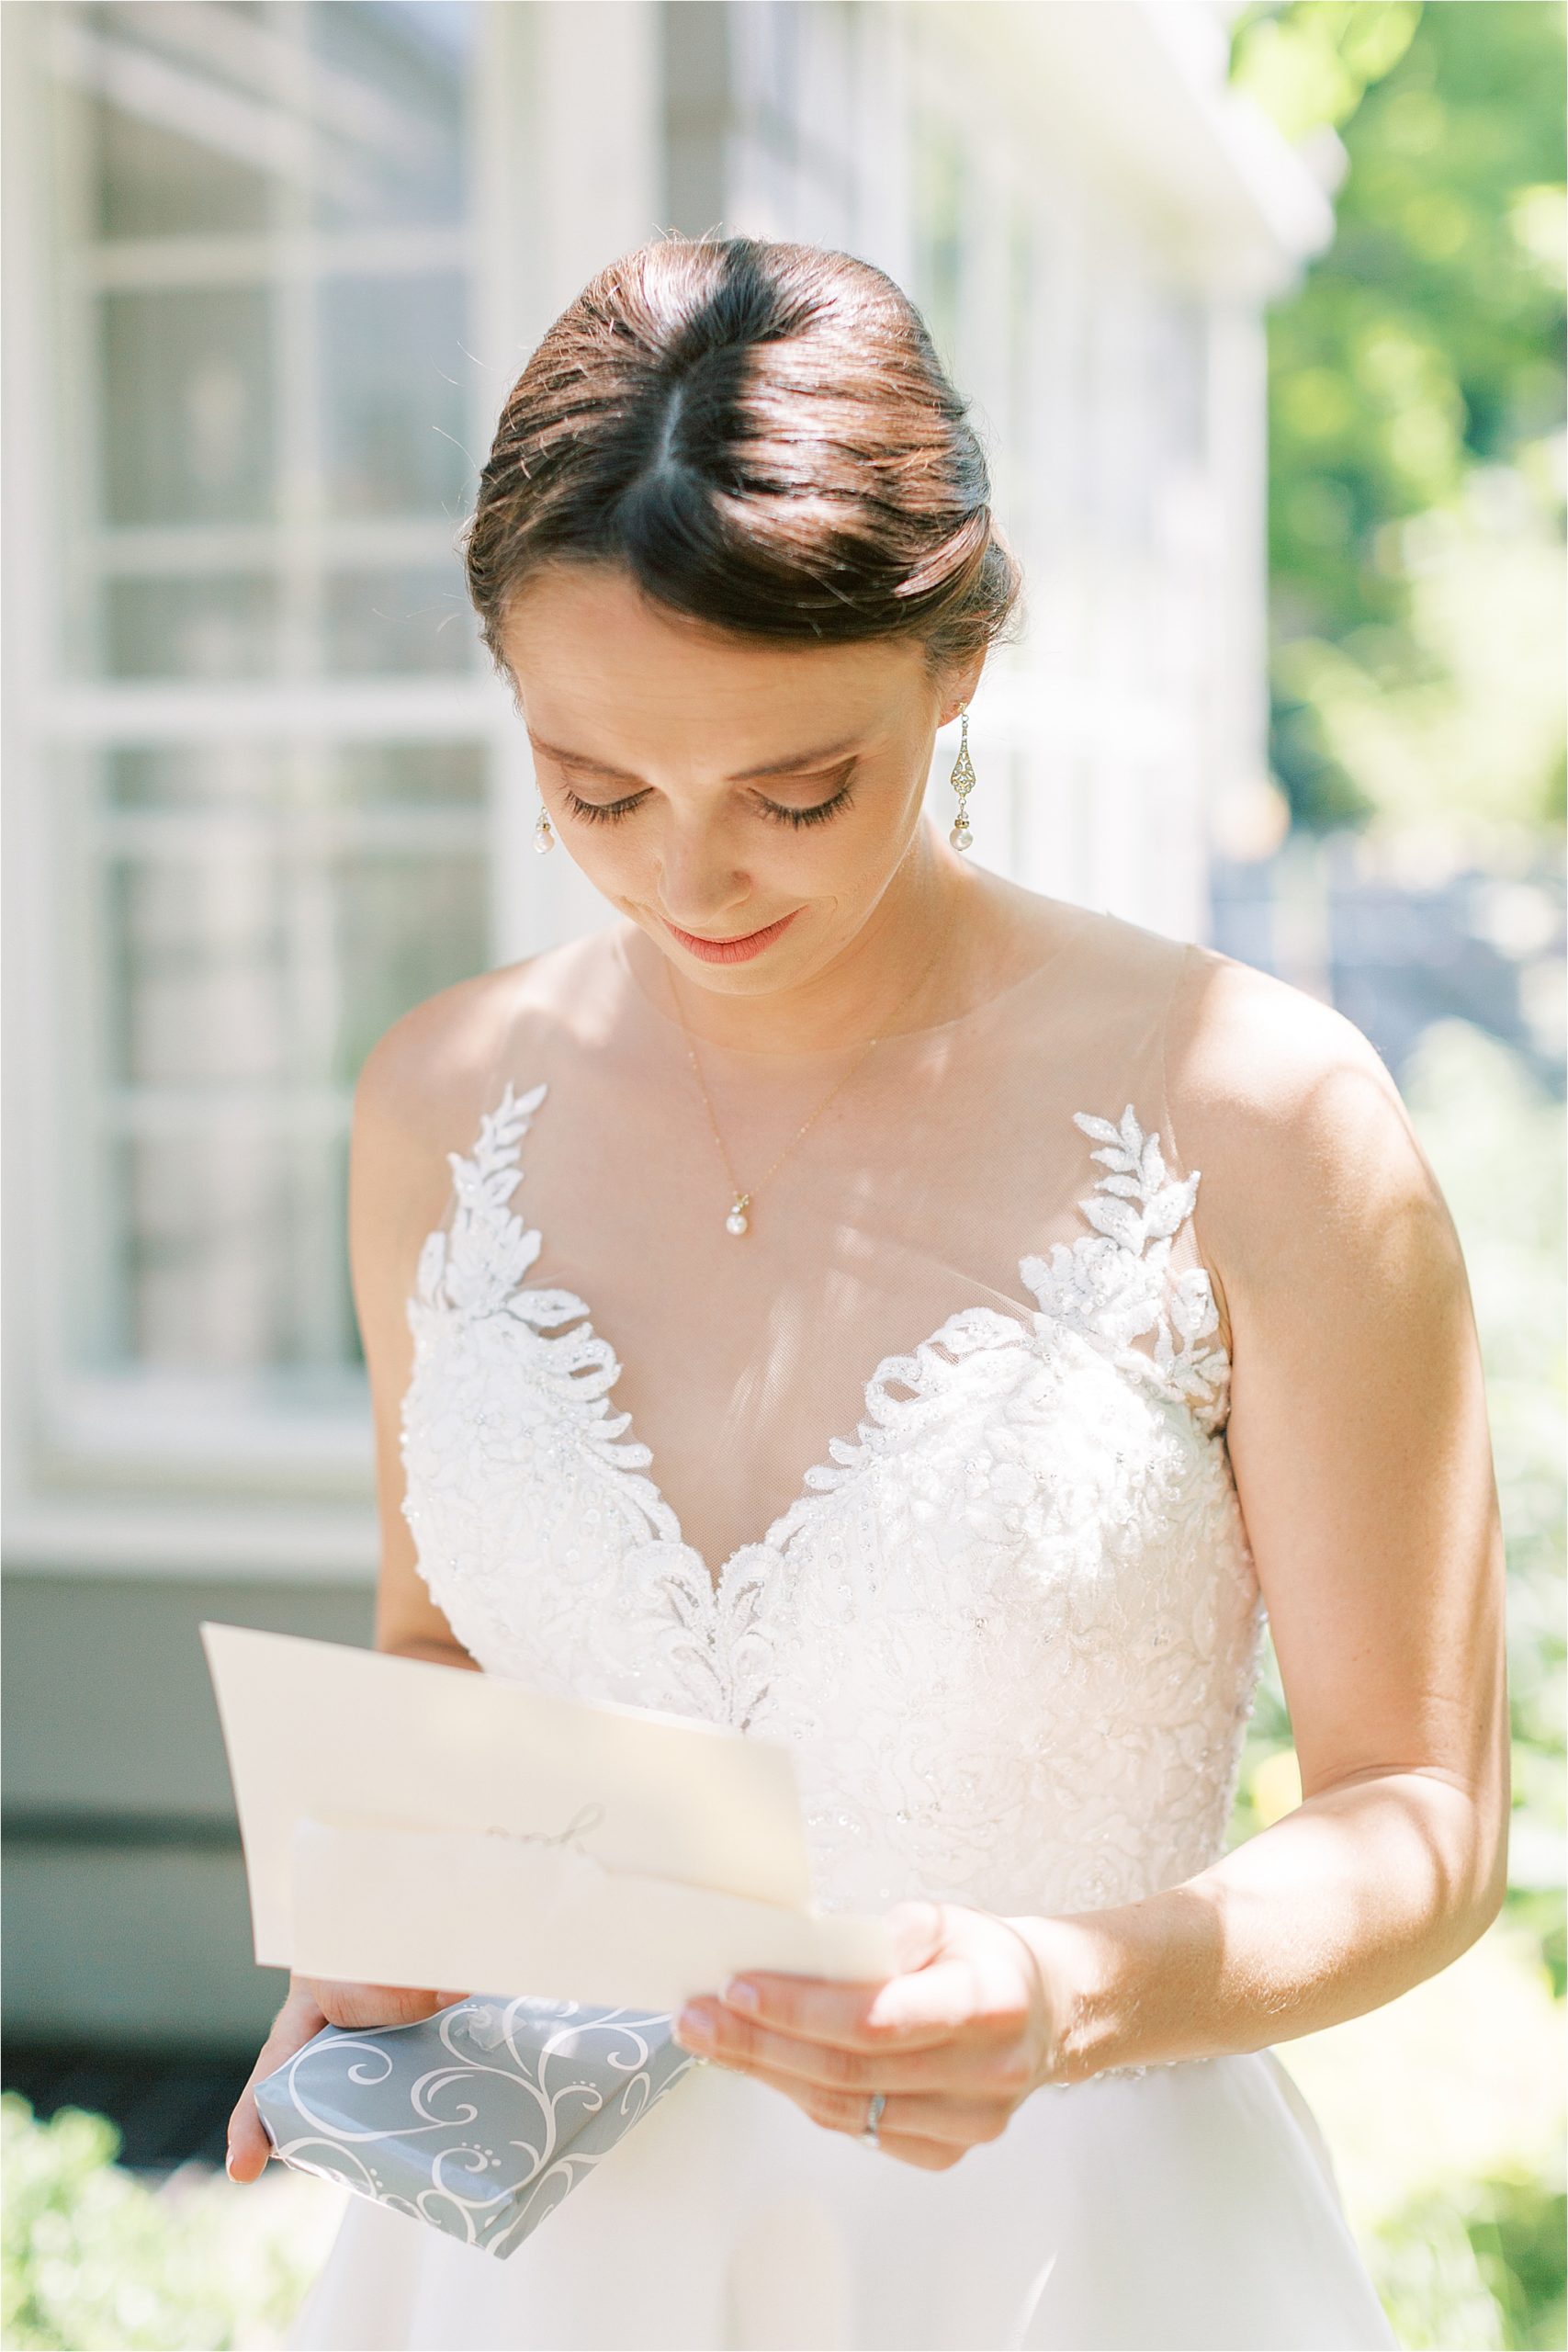 Emotional Bride reads letter from groom